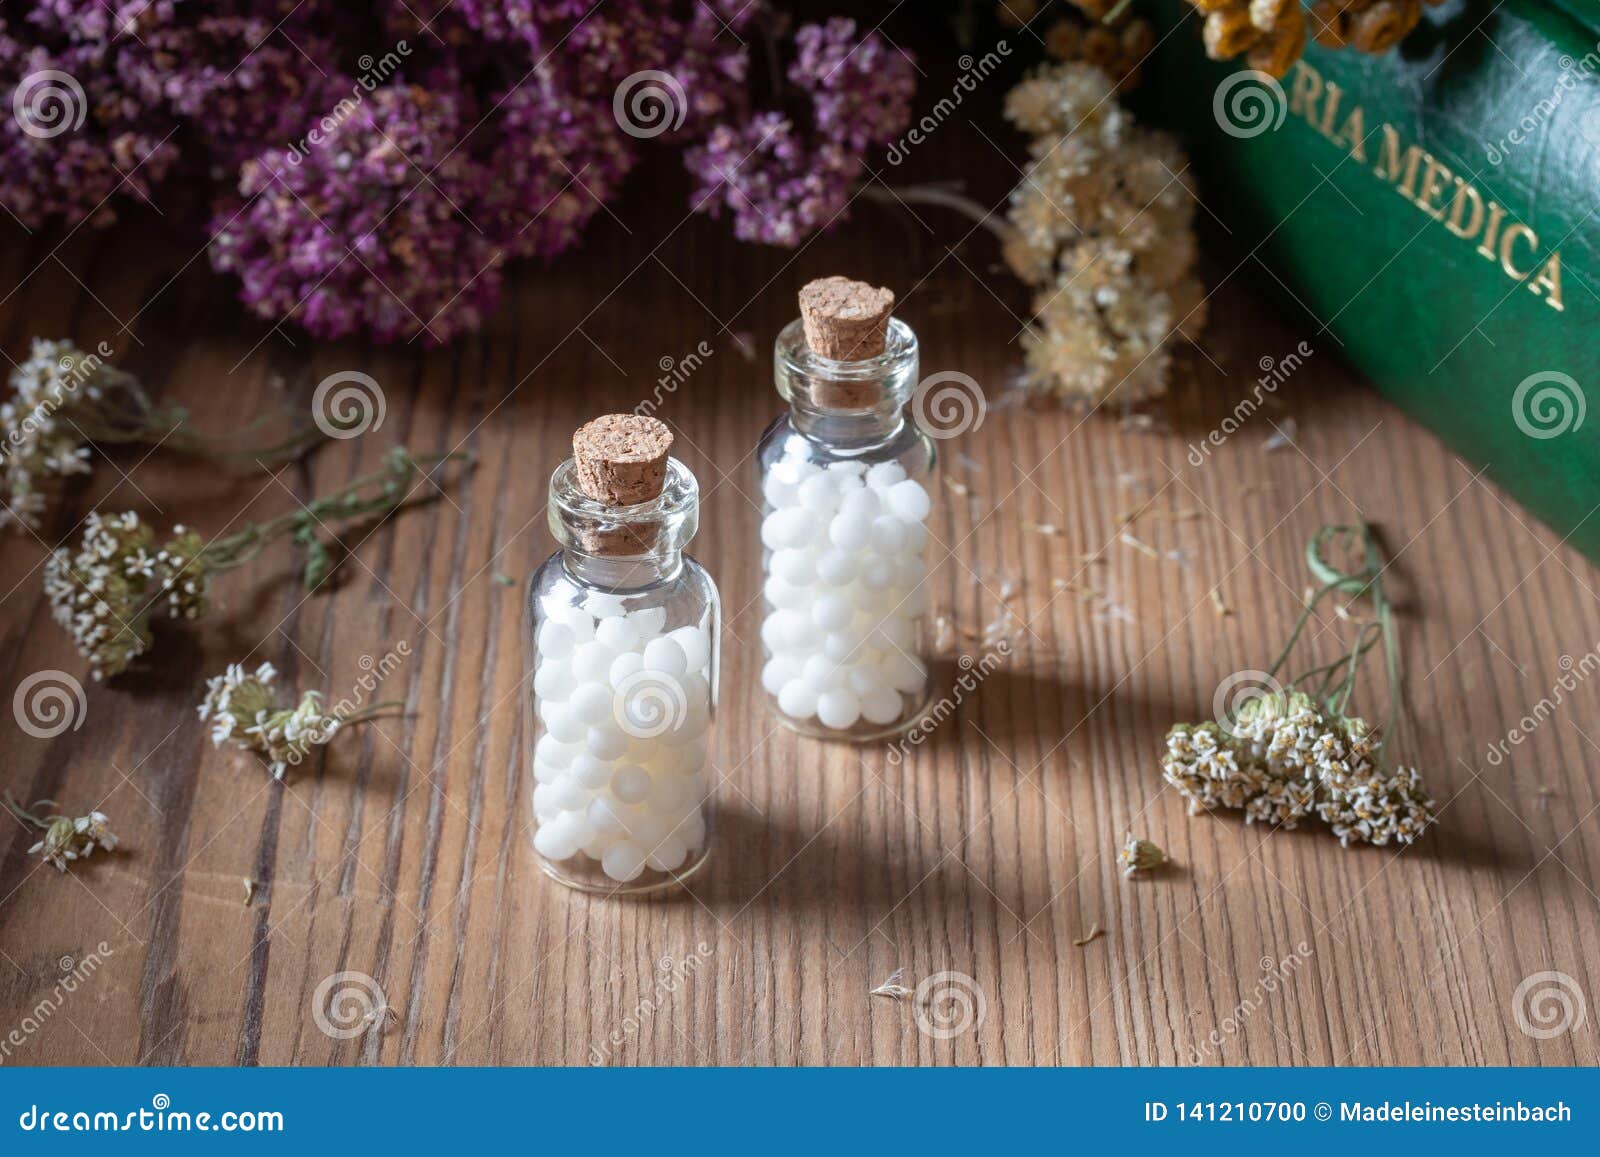 bottles of homeopathic pills with dried herbs and materia medica